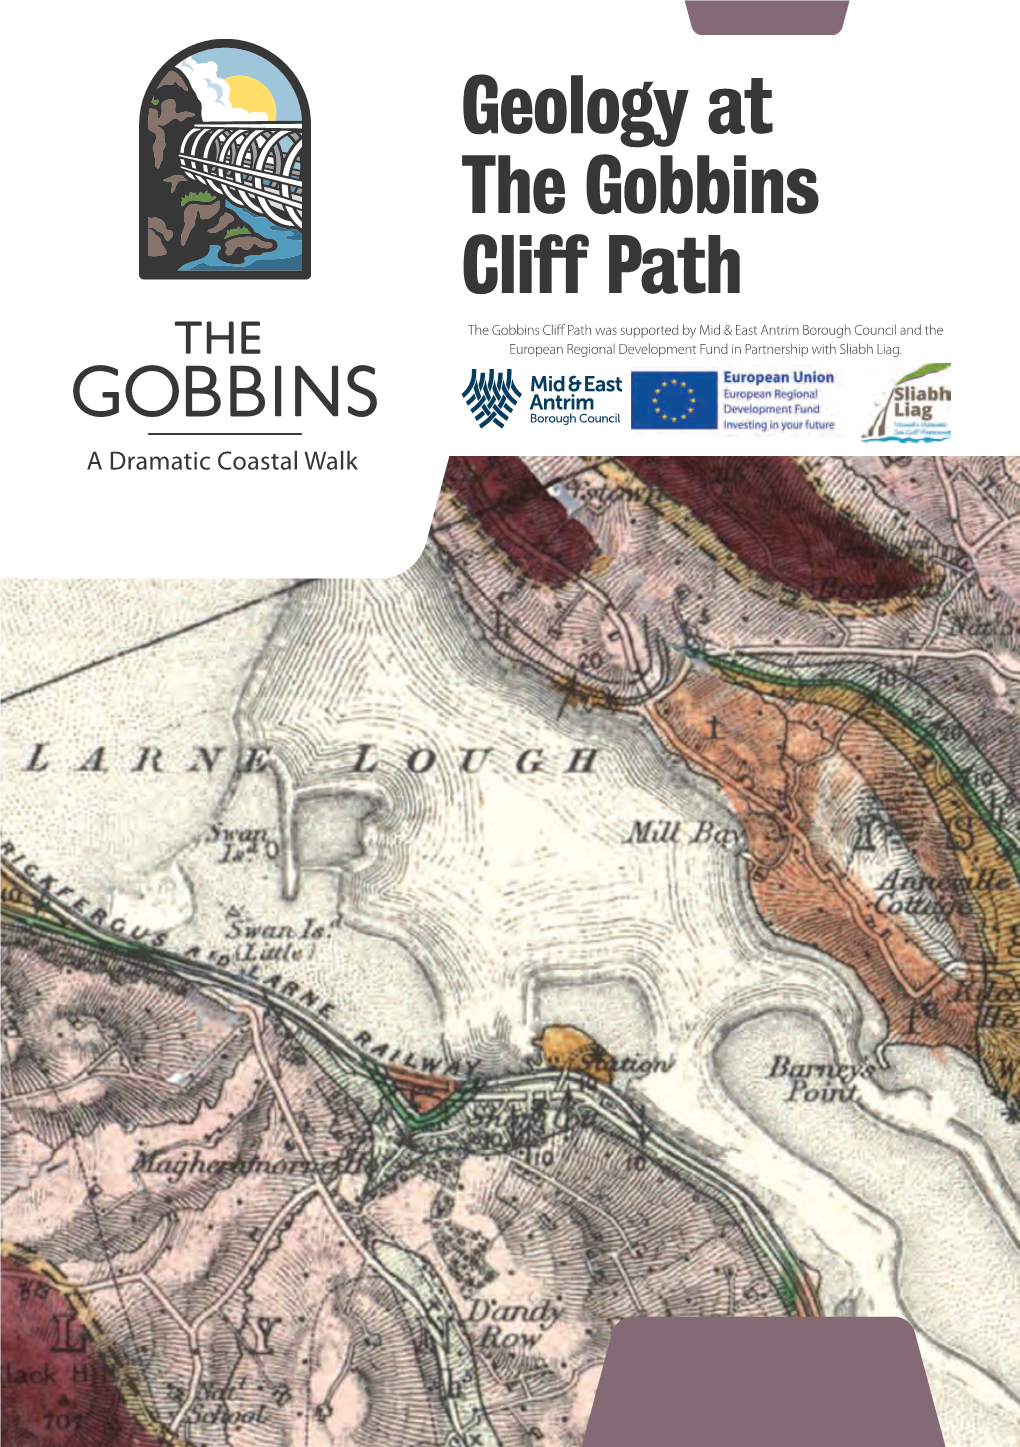 Geology at the Gobbins Cliff Path